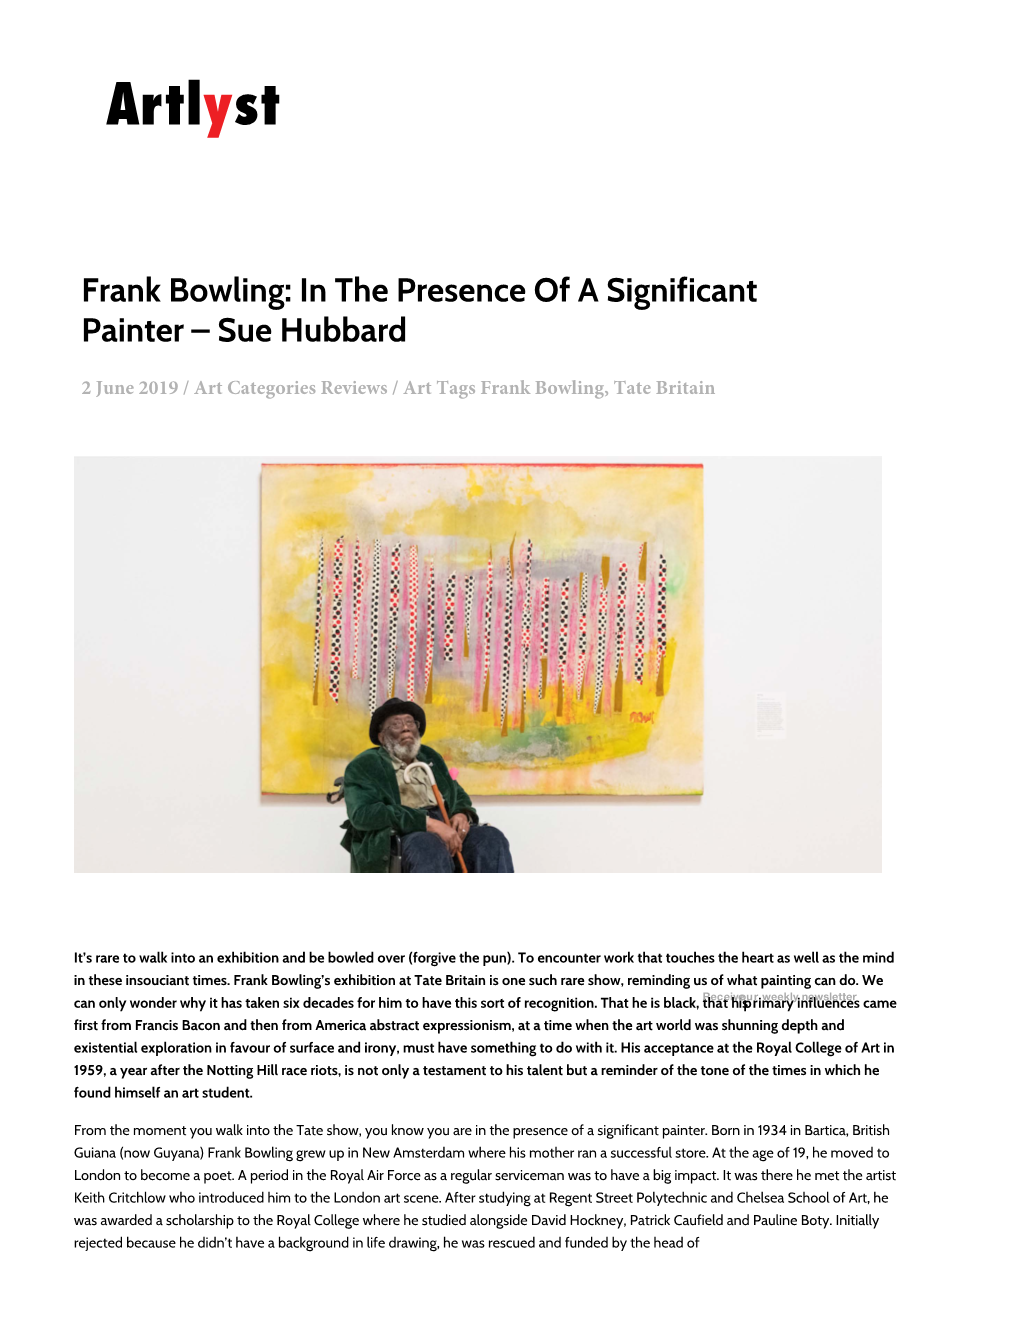 Frank Bowling: in the Presence of a Significant Painter – Sue Hubbard